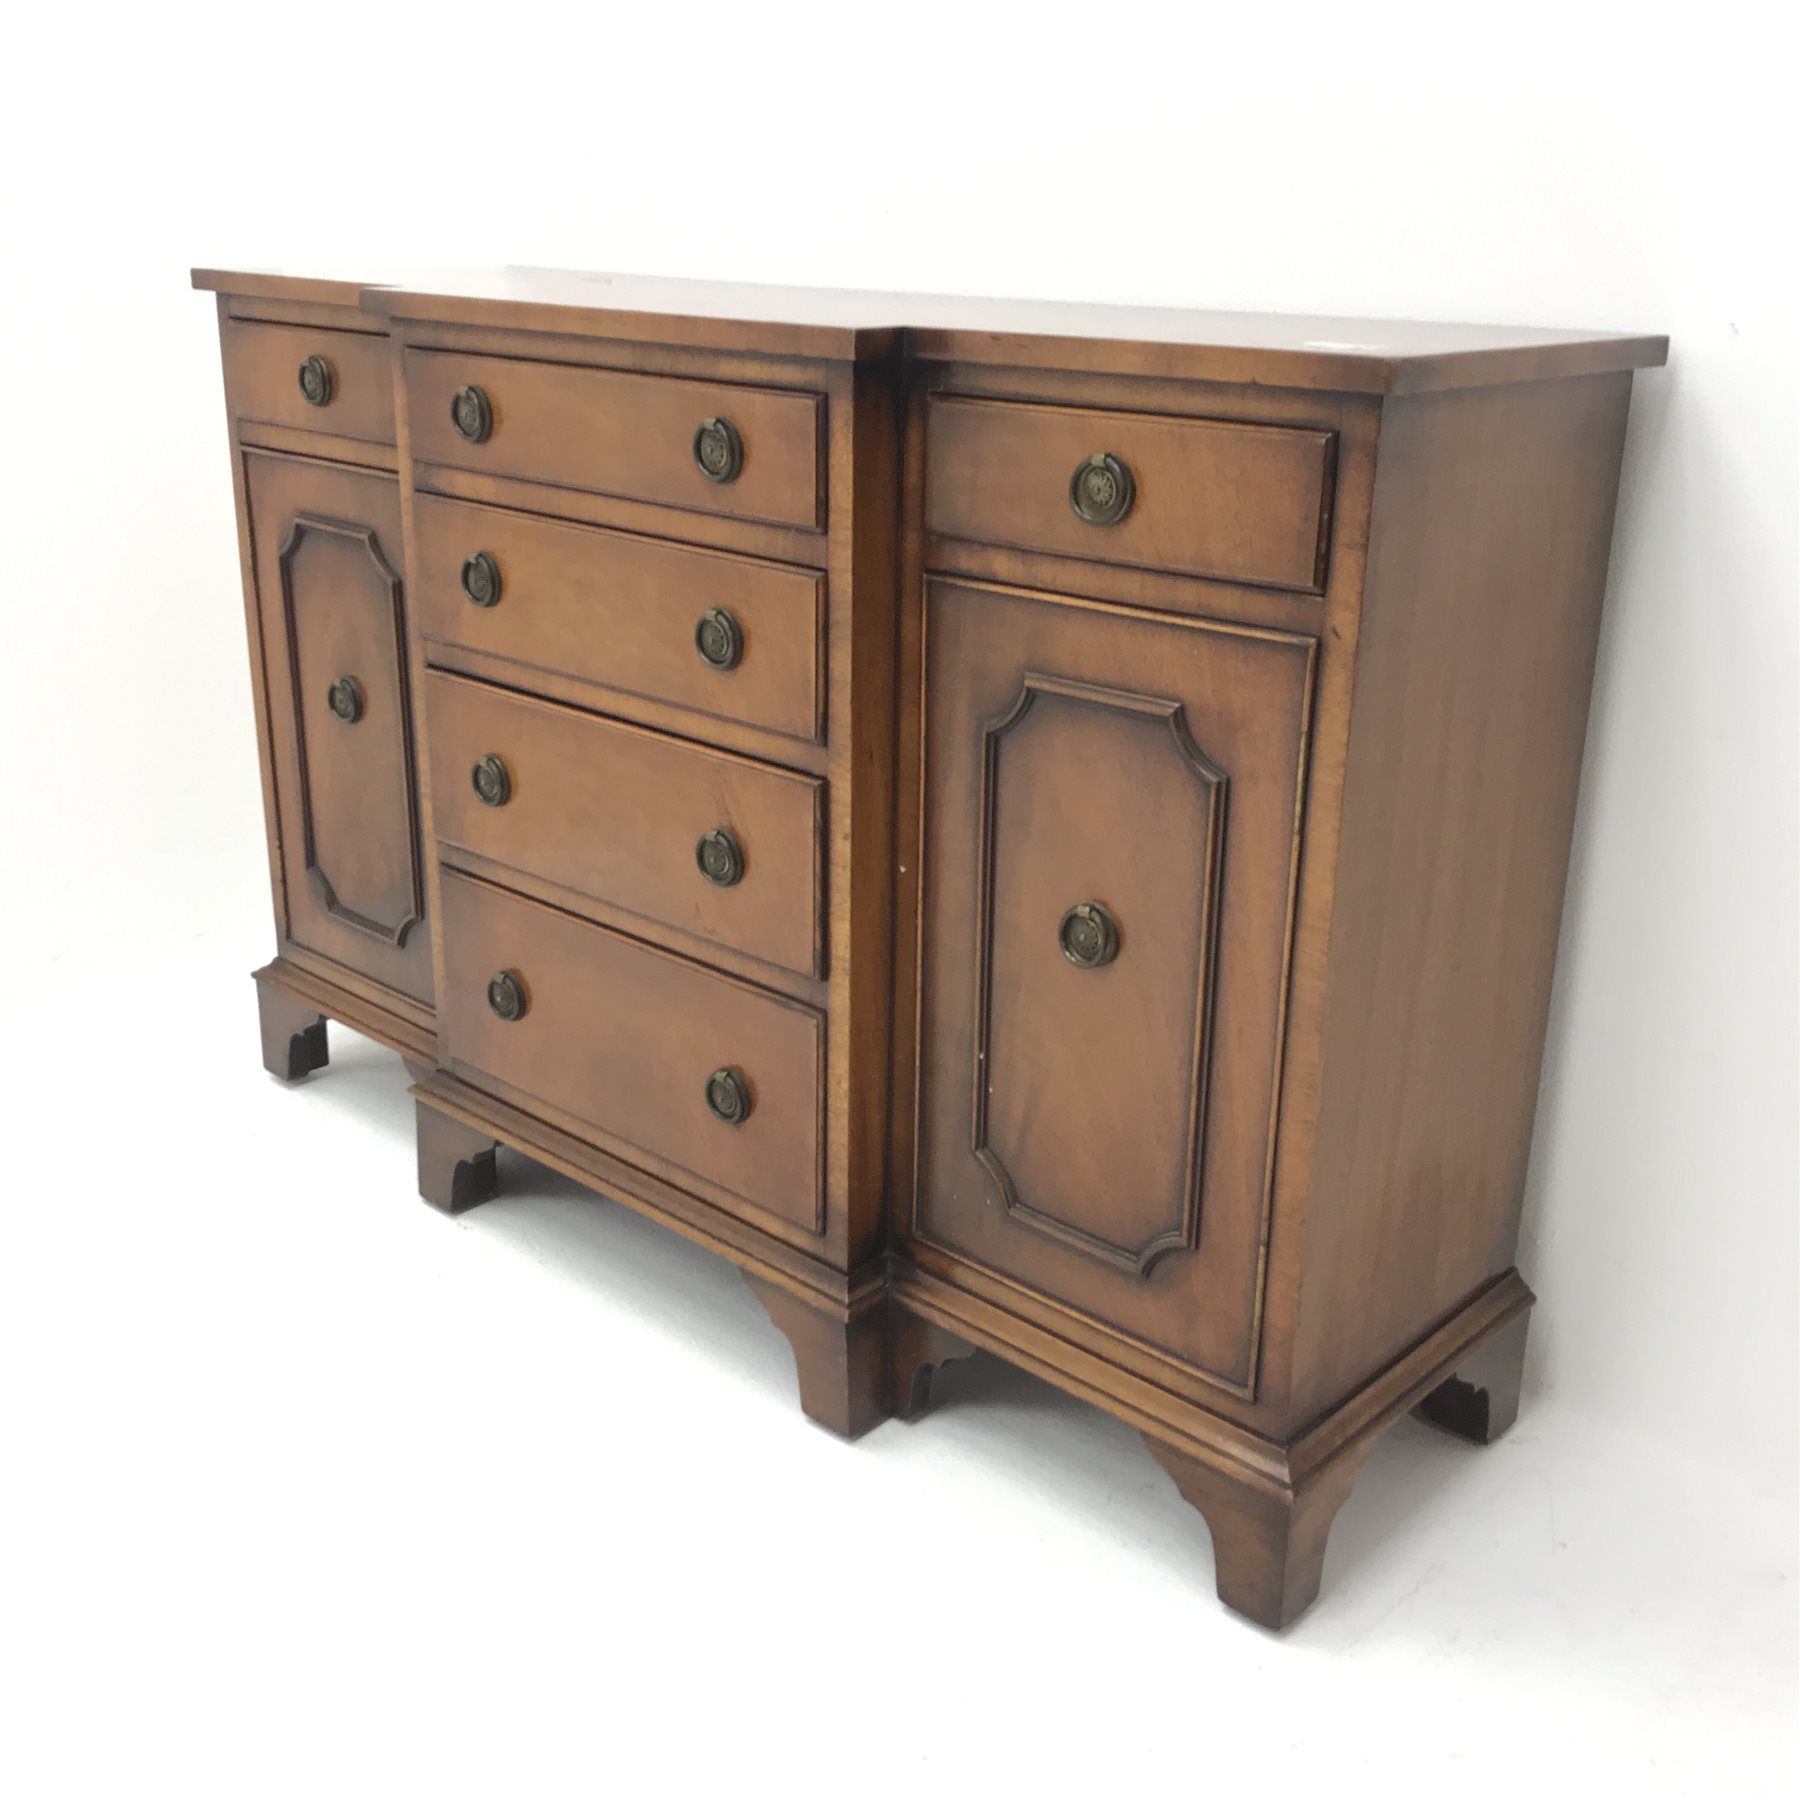 Bevan Funnell Reprodux small cross banded mahogany breakfront sideboard, six drawers, two cupboards, - Image 2 of 10